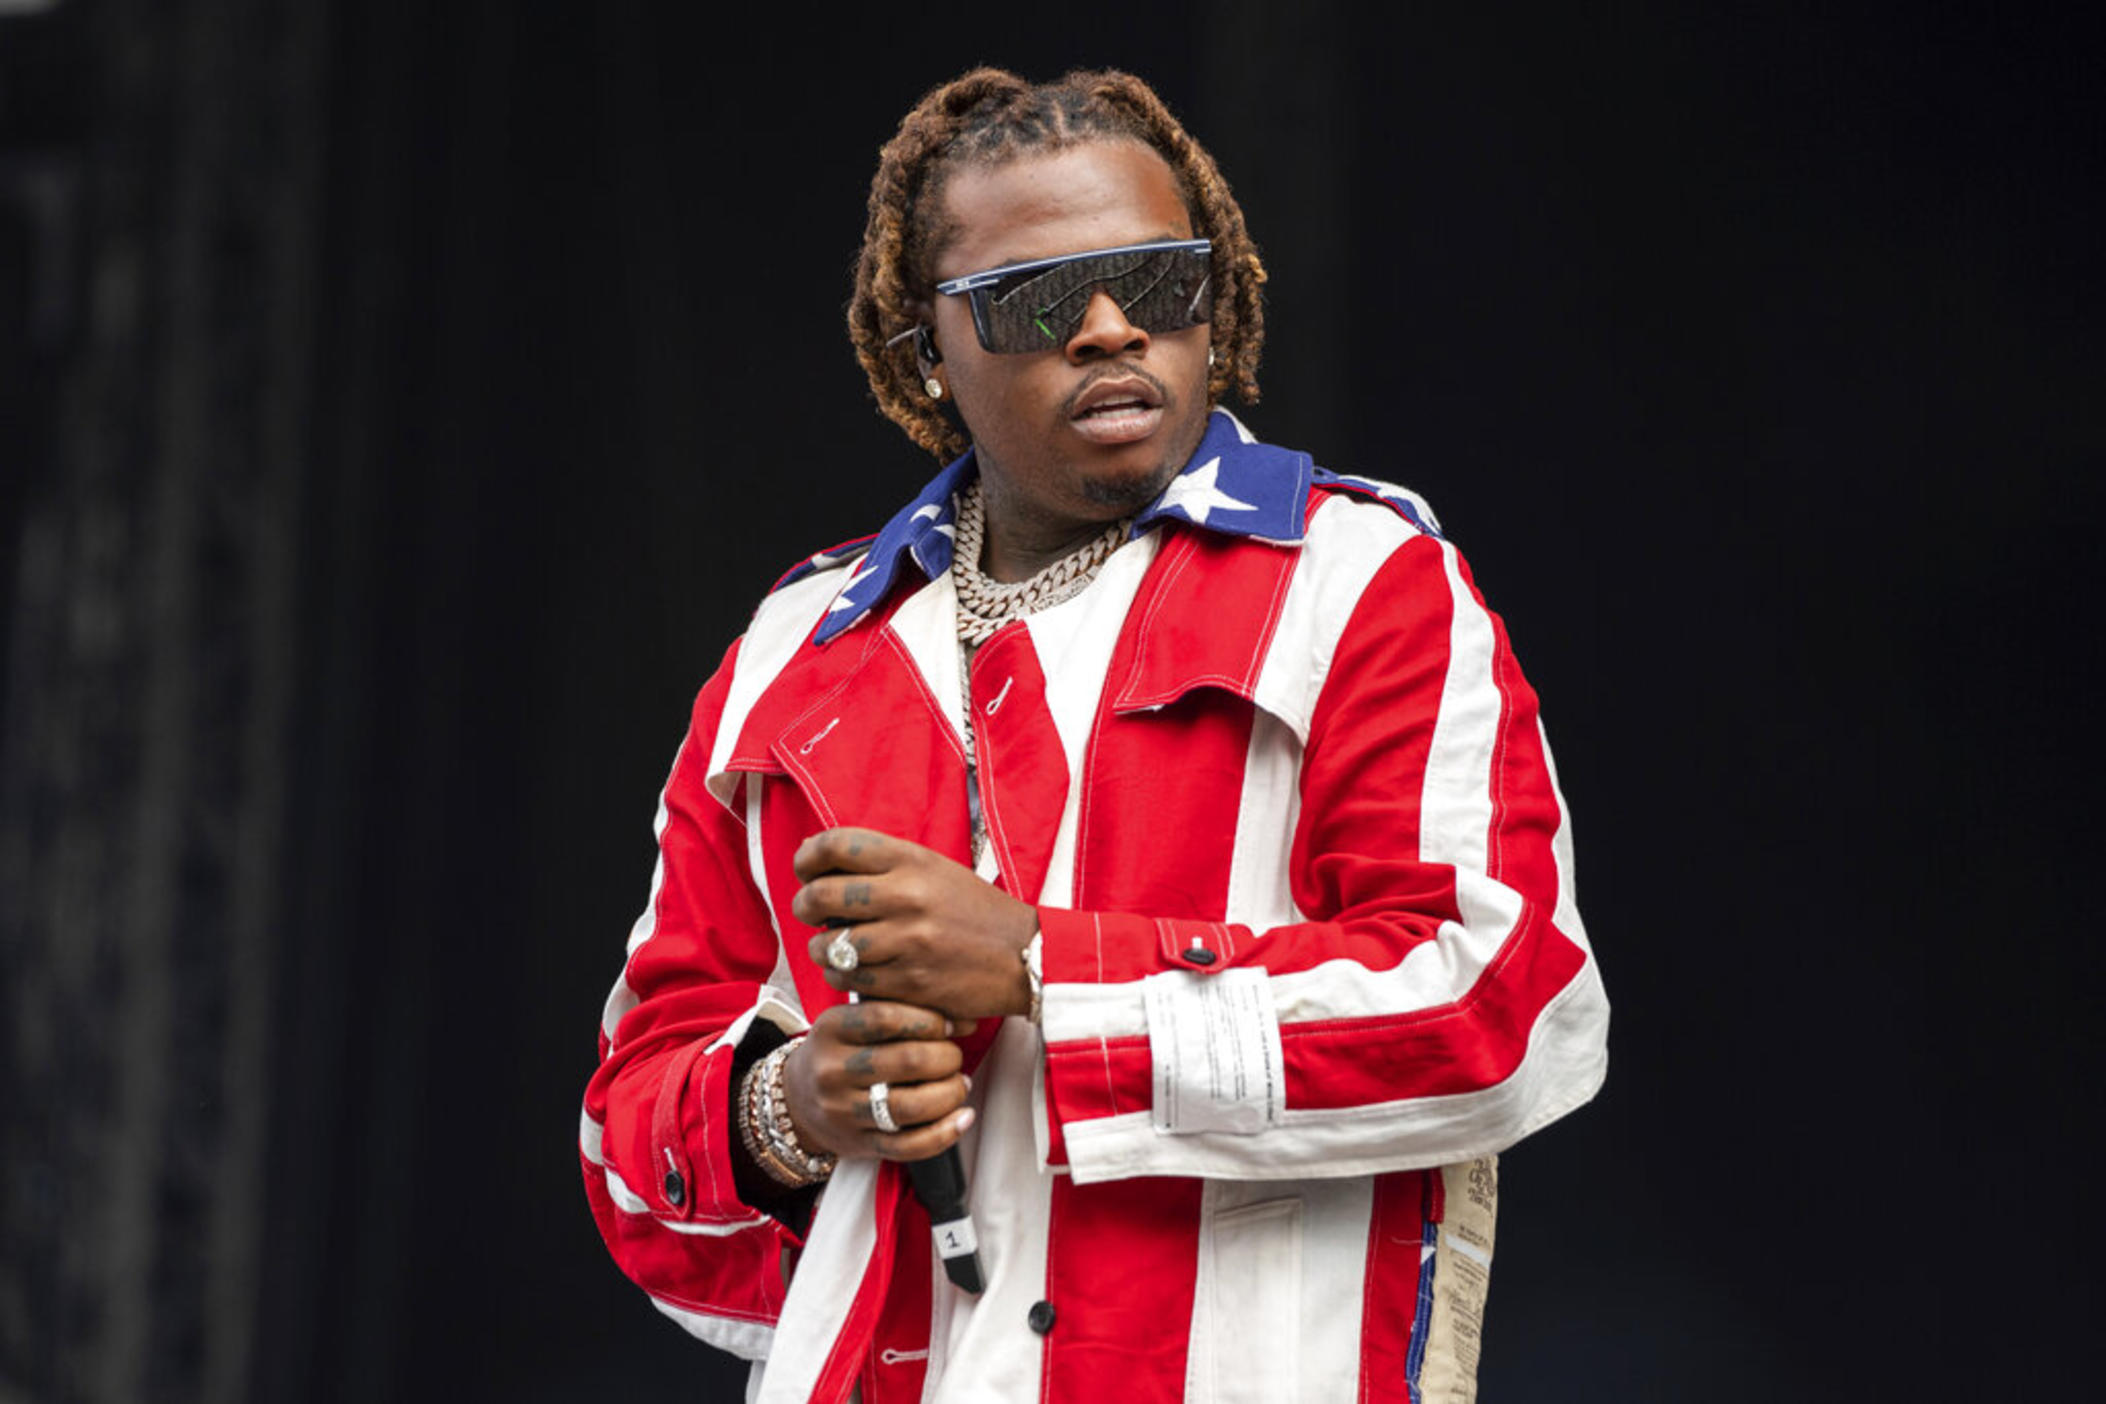 Gunna performs at the Wireless Music Festival, Crystal Palace Park, London, England, on Sep. 10, 2021. A judge in Atlanta on Thursday, July 7, 2022, denied bond for rapper Gunna, who's charged with racketeering along with fellow rapper Young Thug and more than two dozen other people.